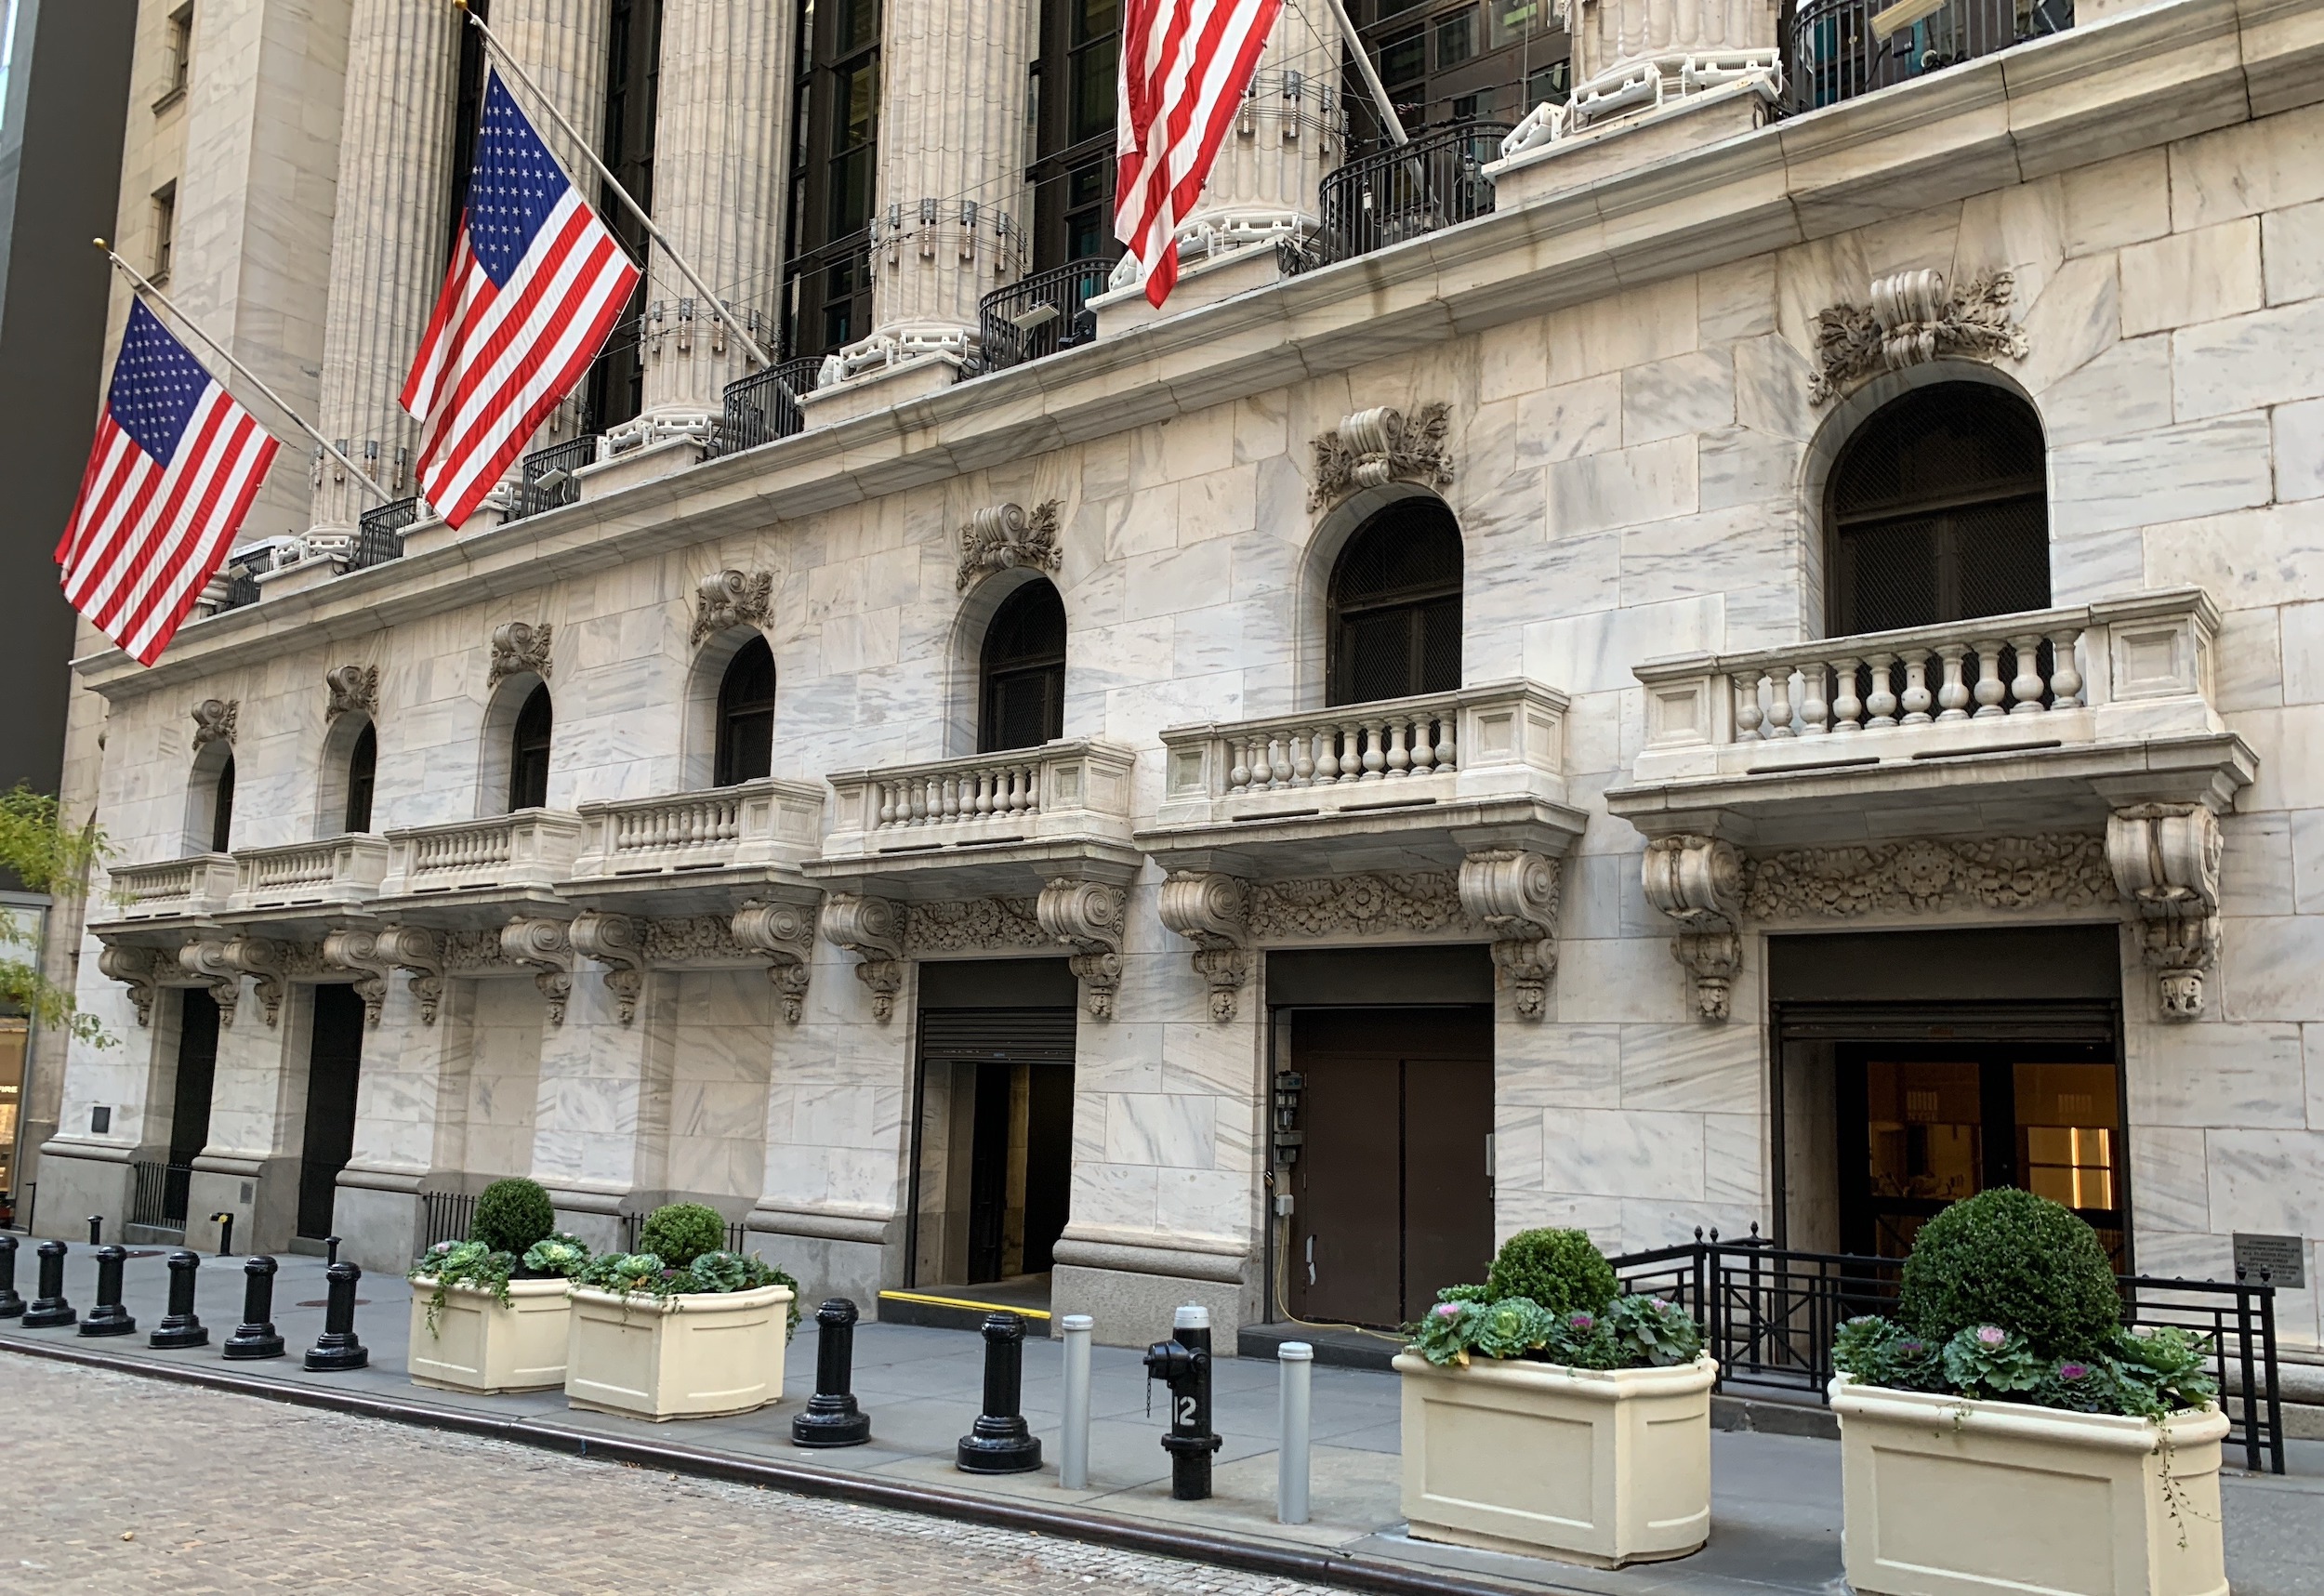 Even for doors at the New York Stock Exchange that were not original to the building, the proposed replacement designs required a public hearing and Community Board review. Photo courtesy Hoffmann Architects + Engineers 